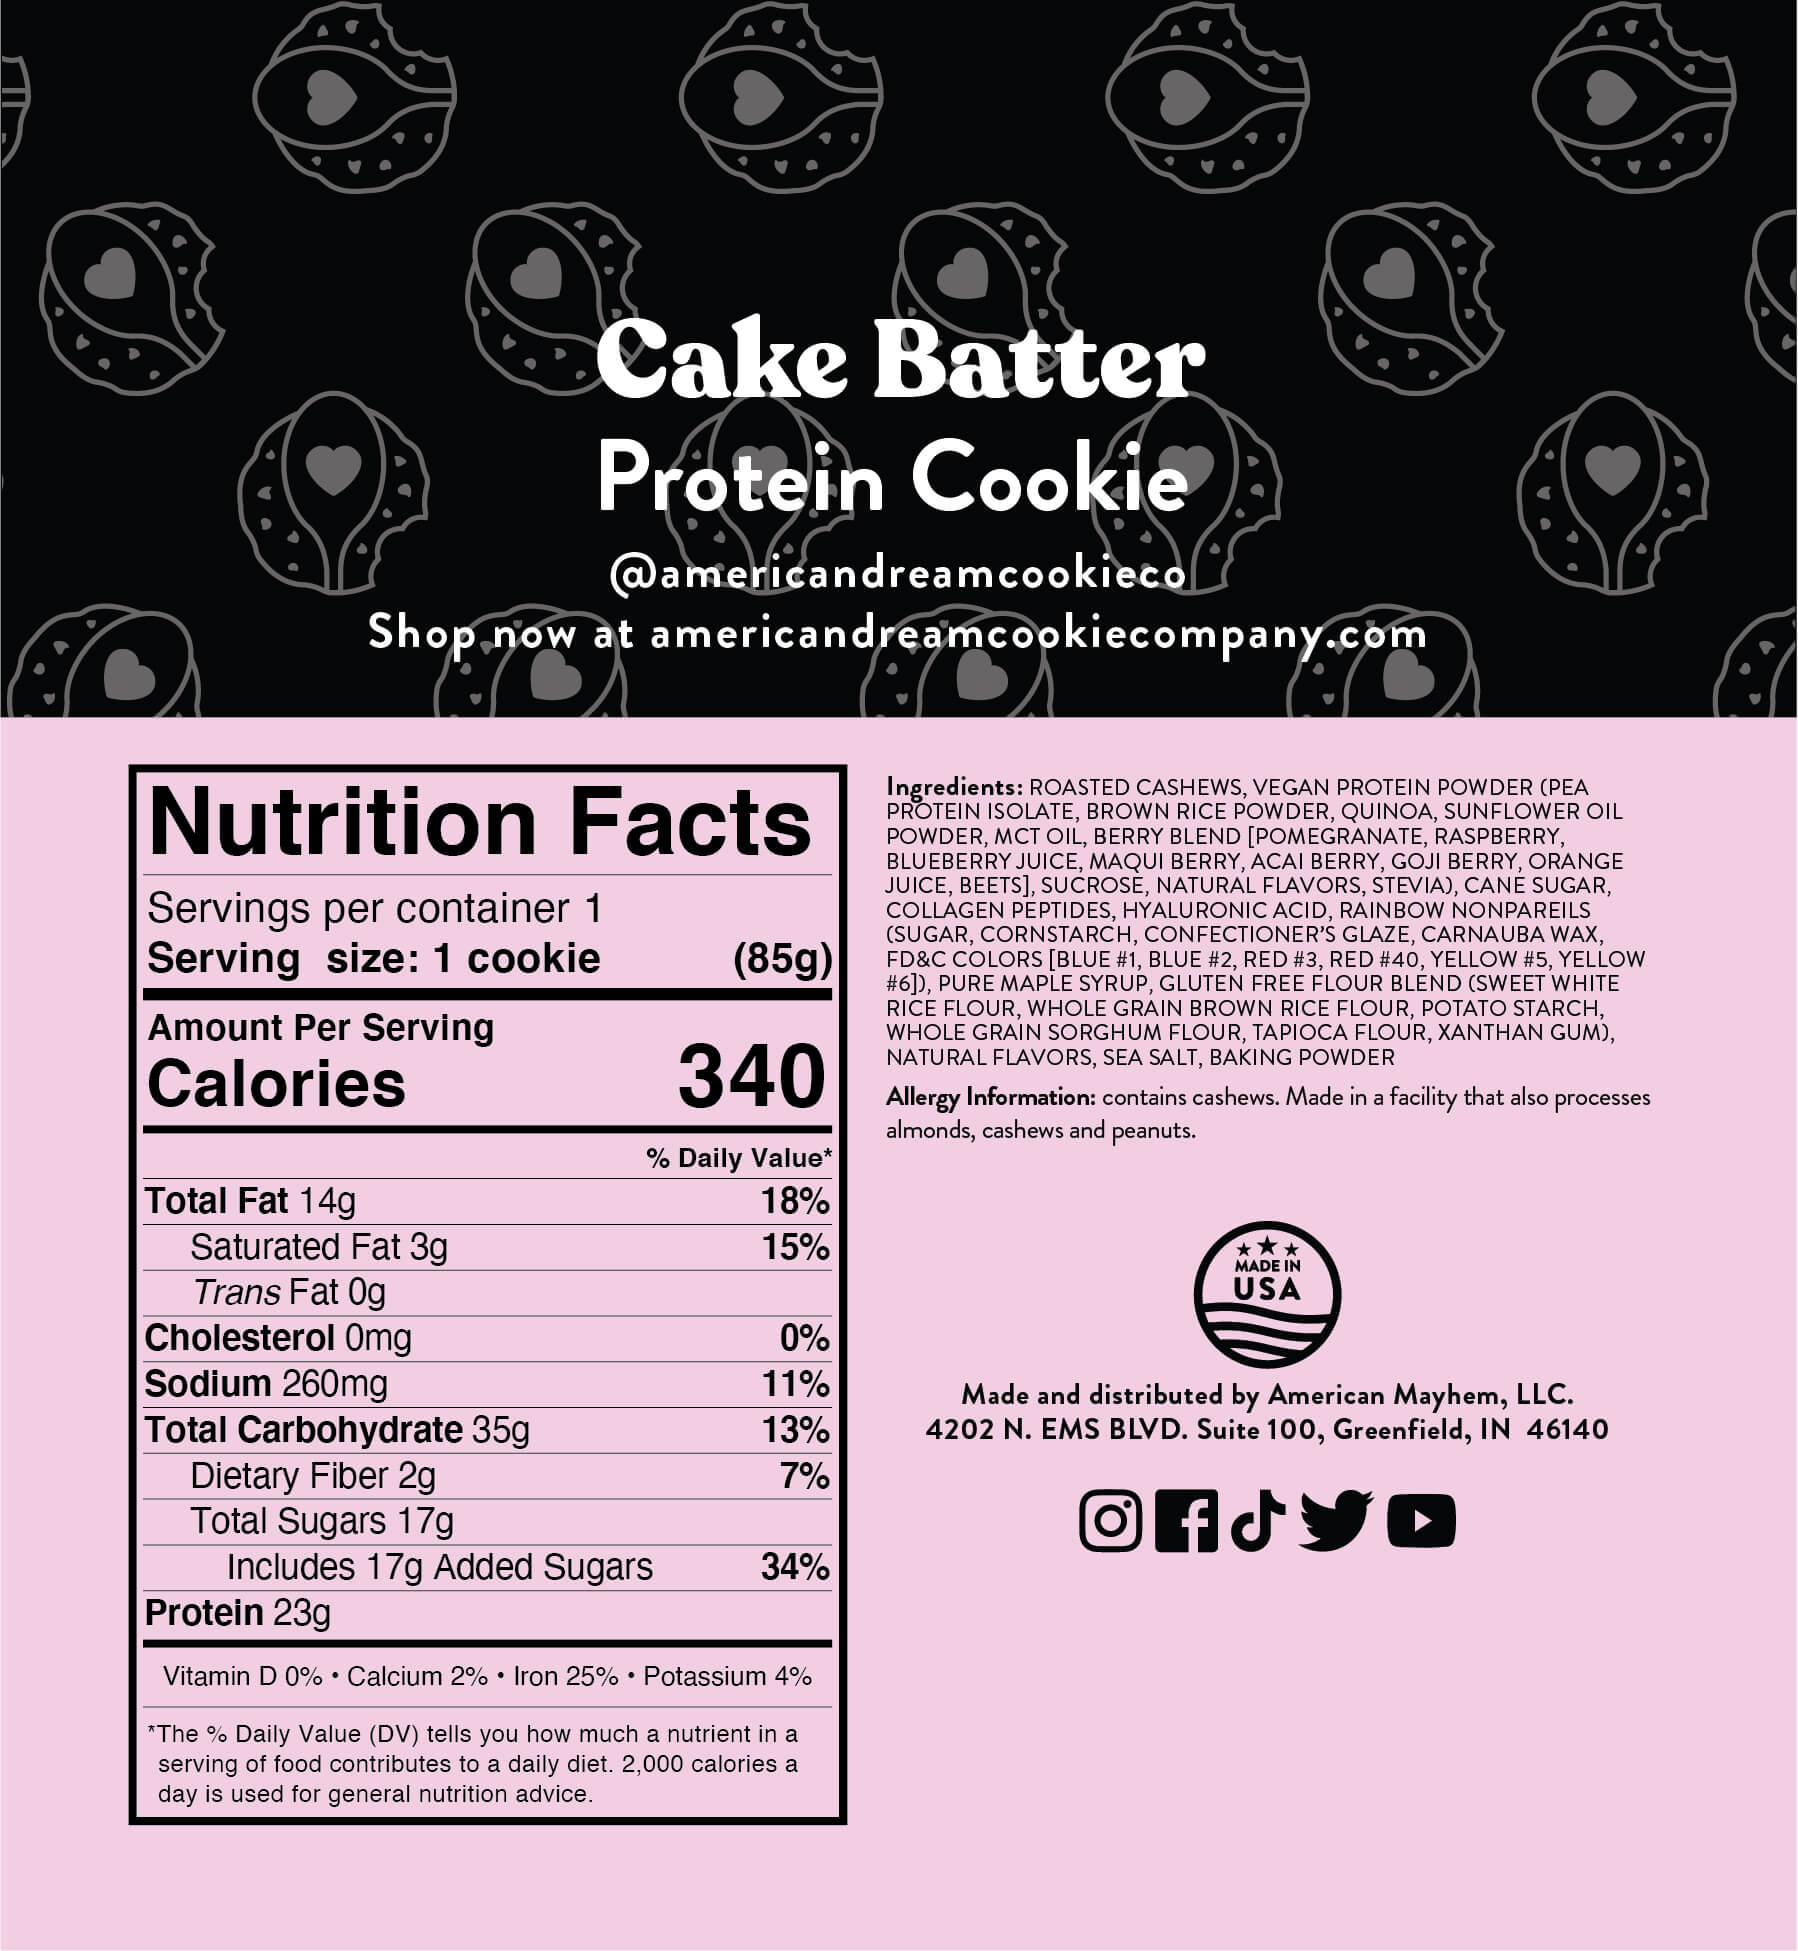 Cake Batter Protein Cookie